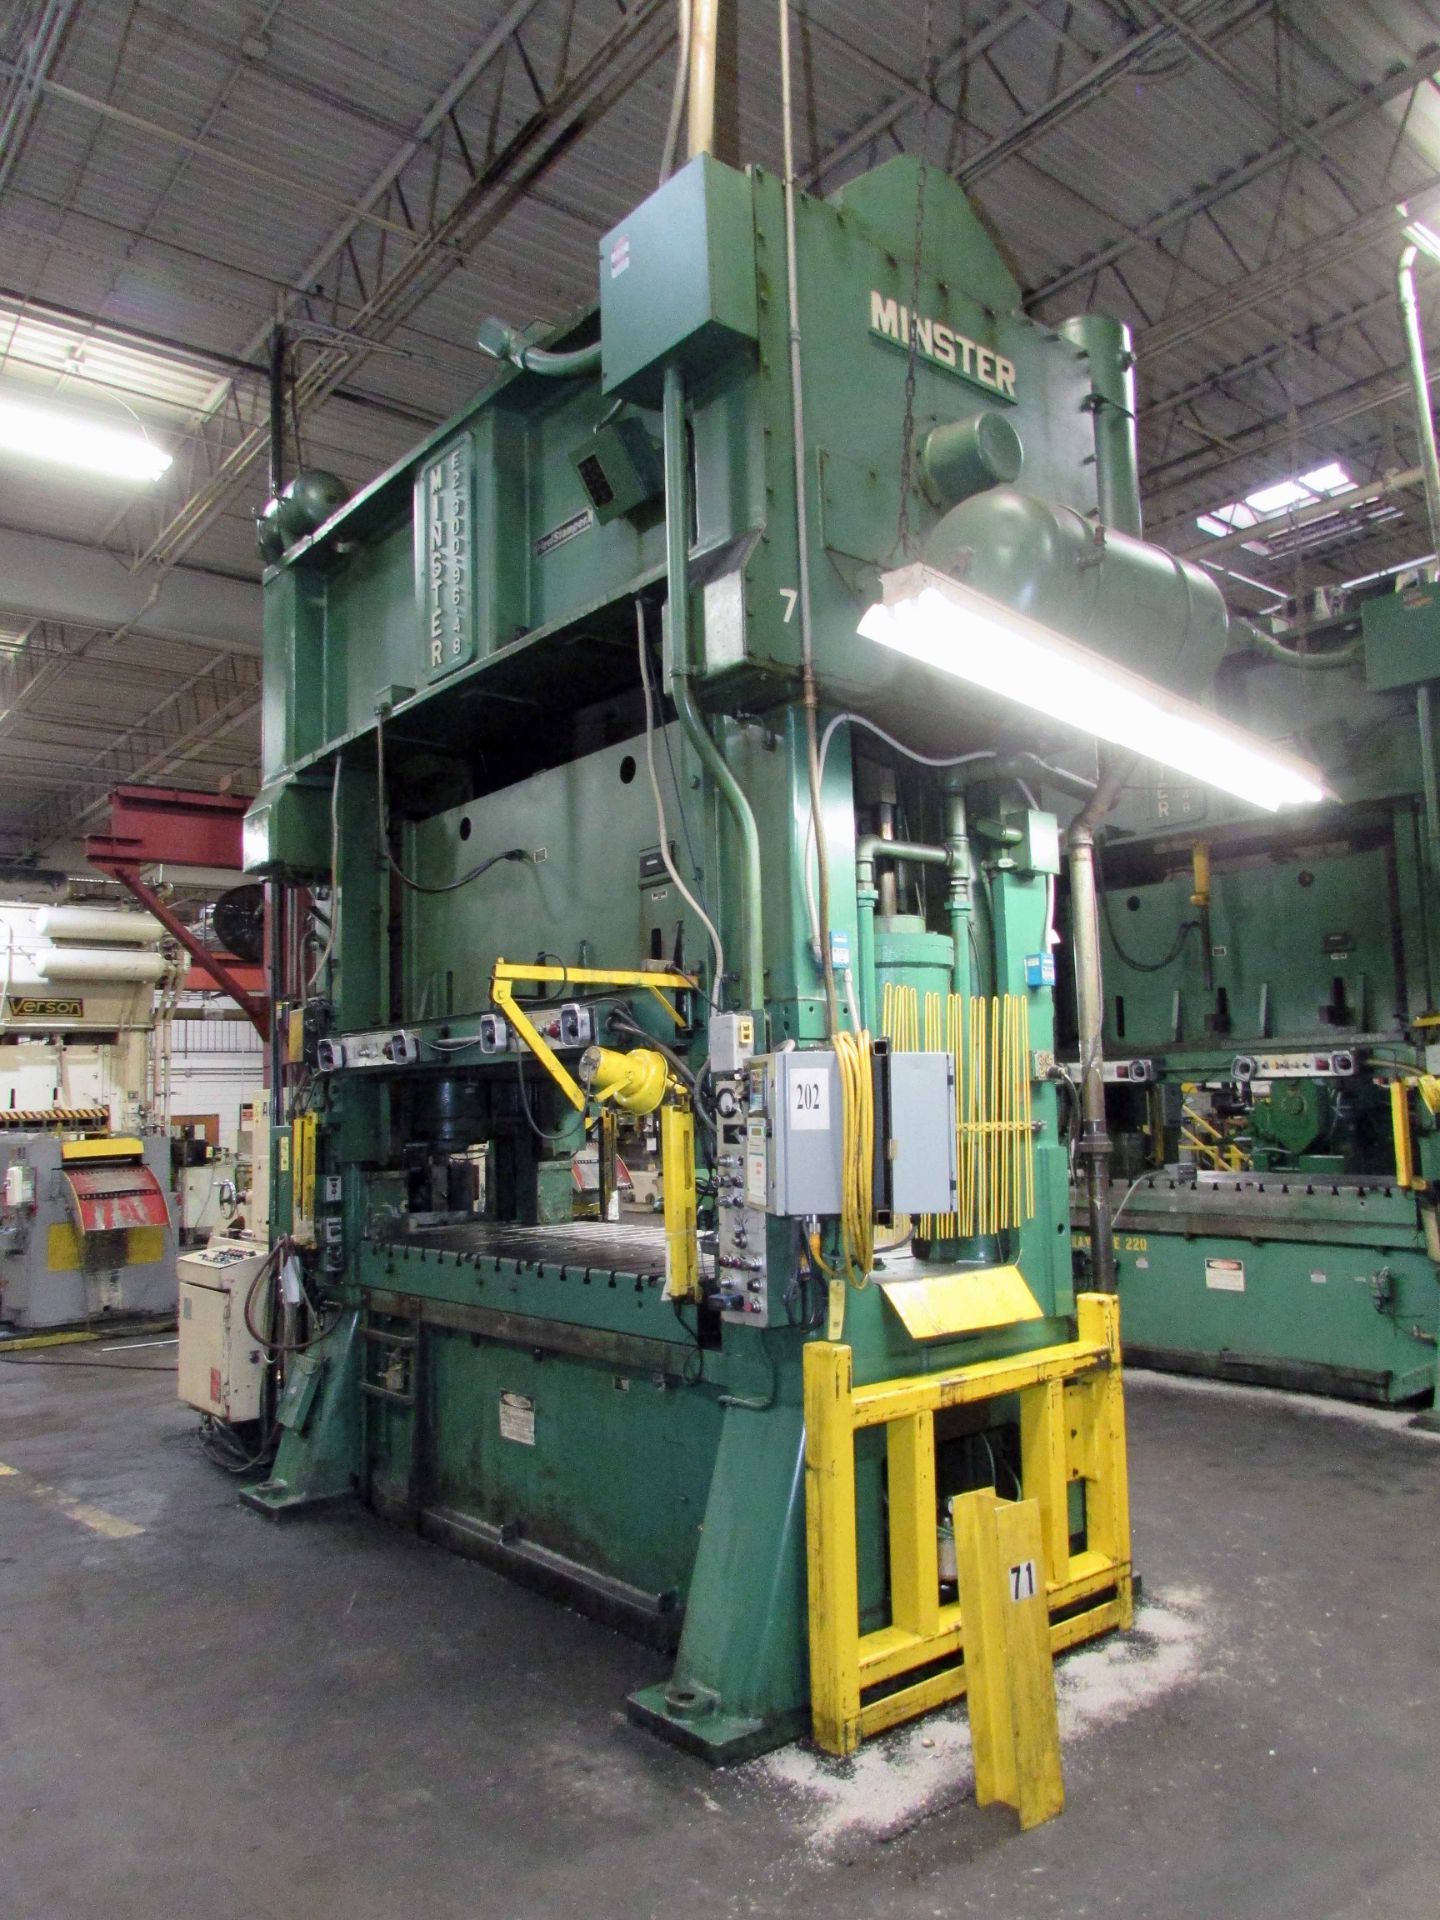 STRAIGHT SIDE 2-POINT ECCENTRIC GEARED PRESS, MINSTER 300 T. CAP. MDL. E2-300-96-48 “HEVI-STAMPER” - Image 5 of 23